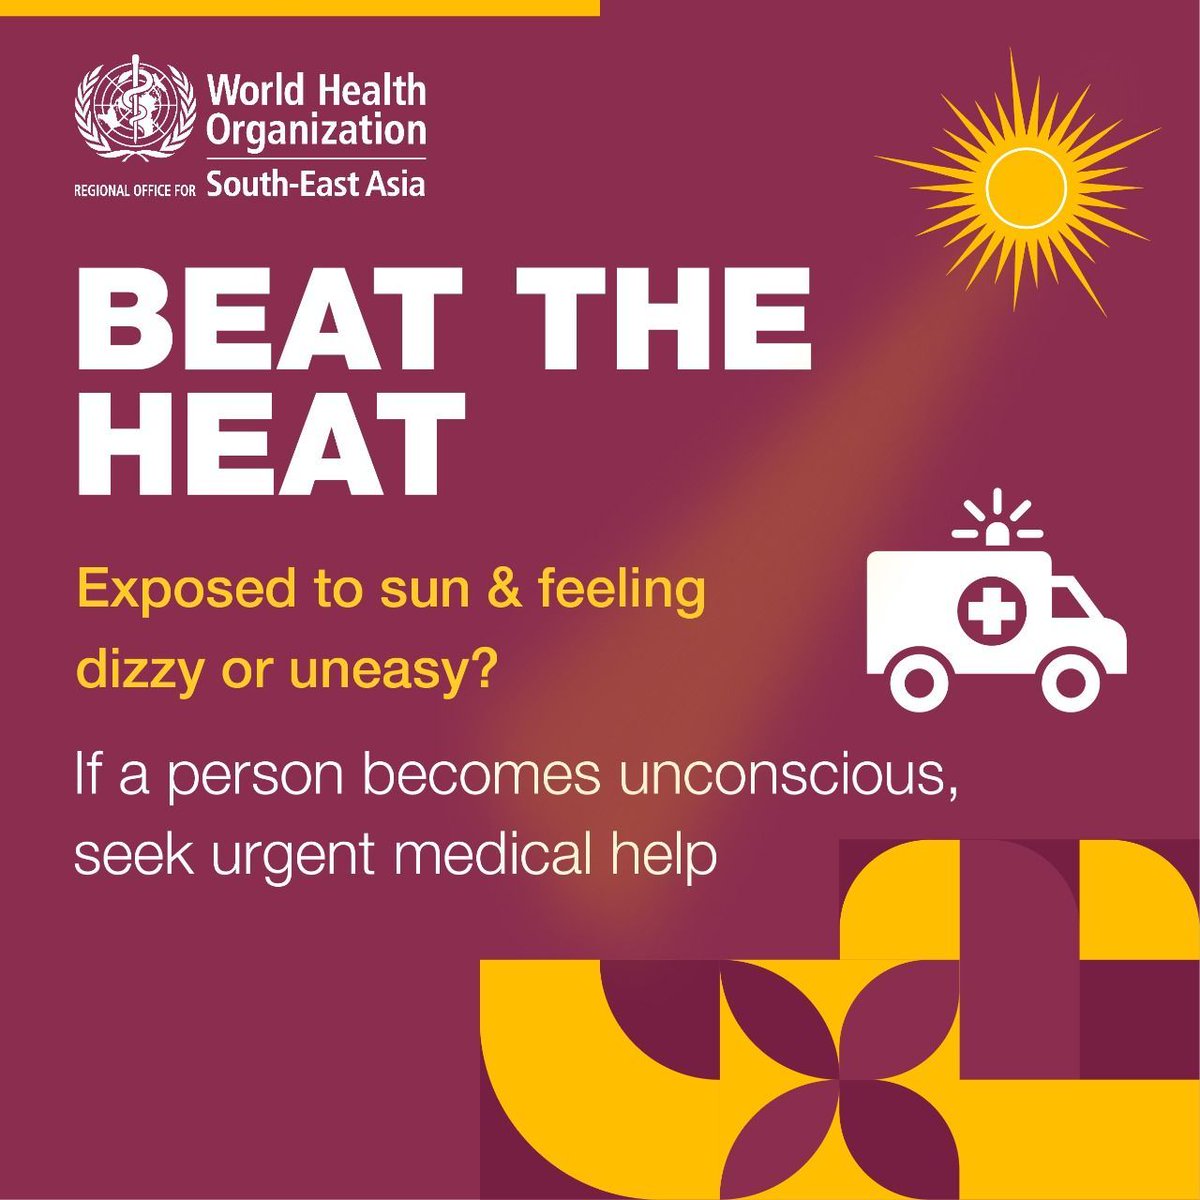 Any person who falls unconscious after exposure to sun should be provided urgent medical help.